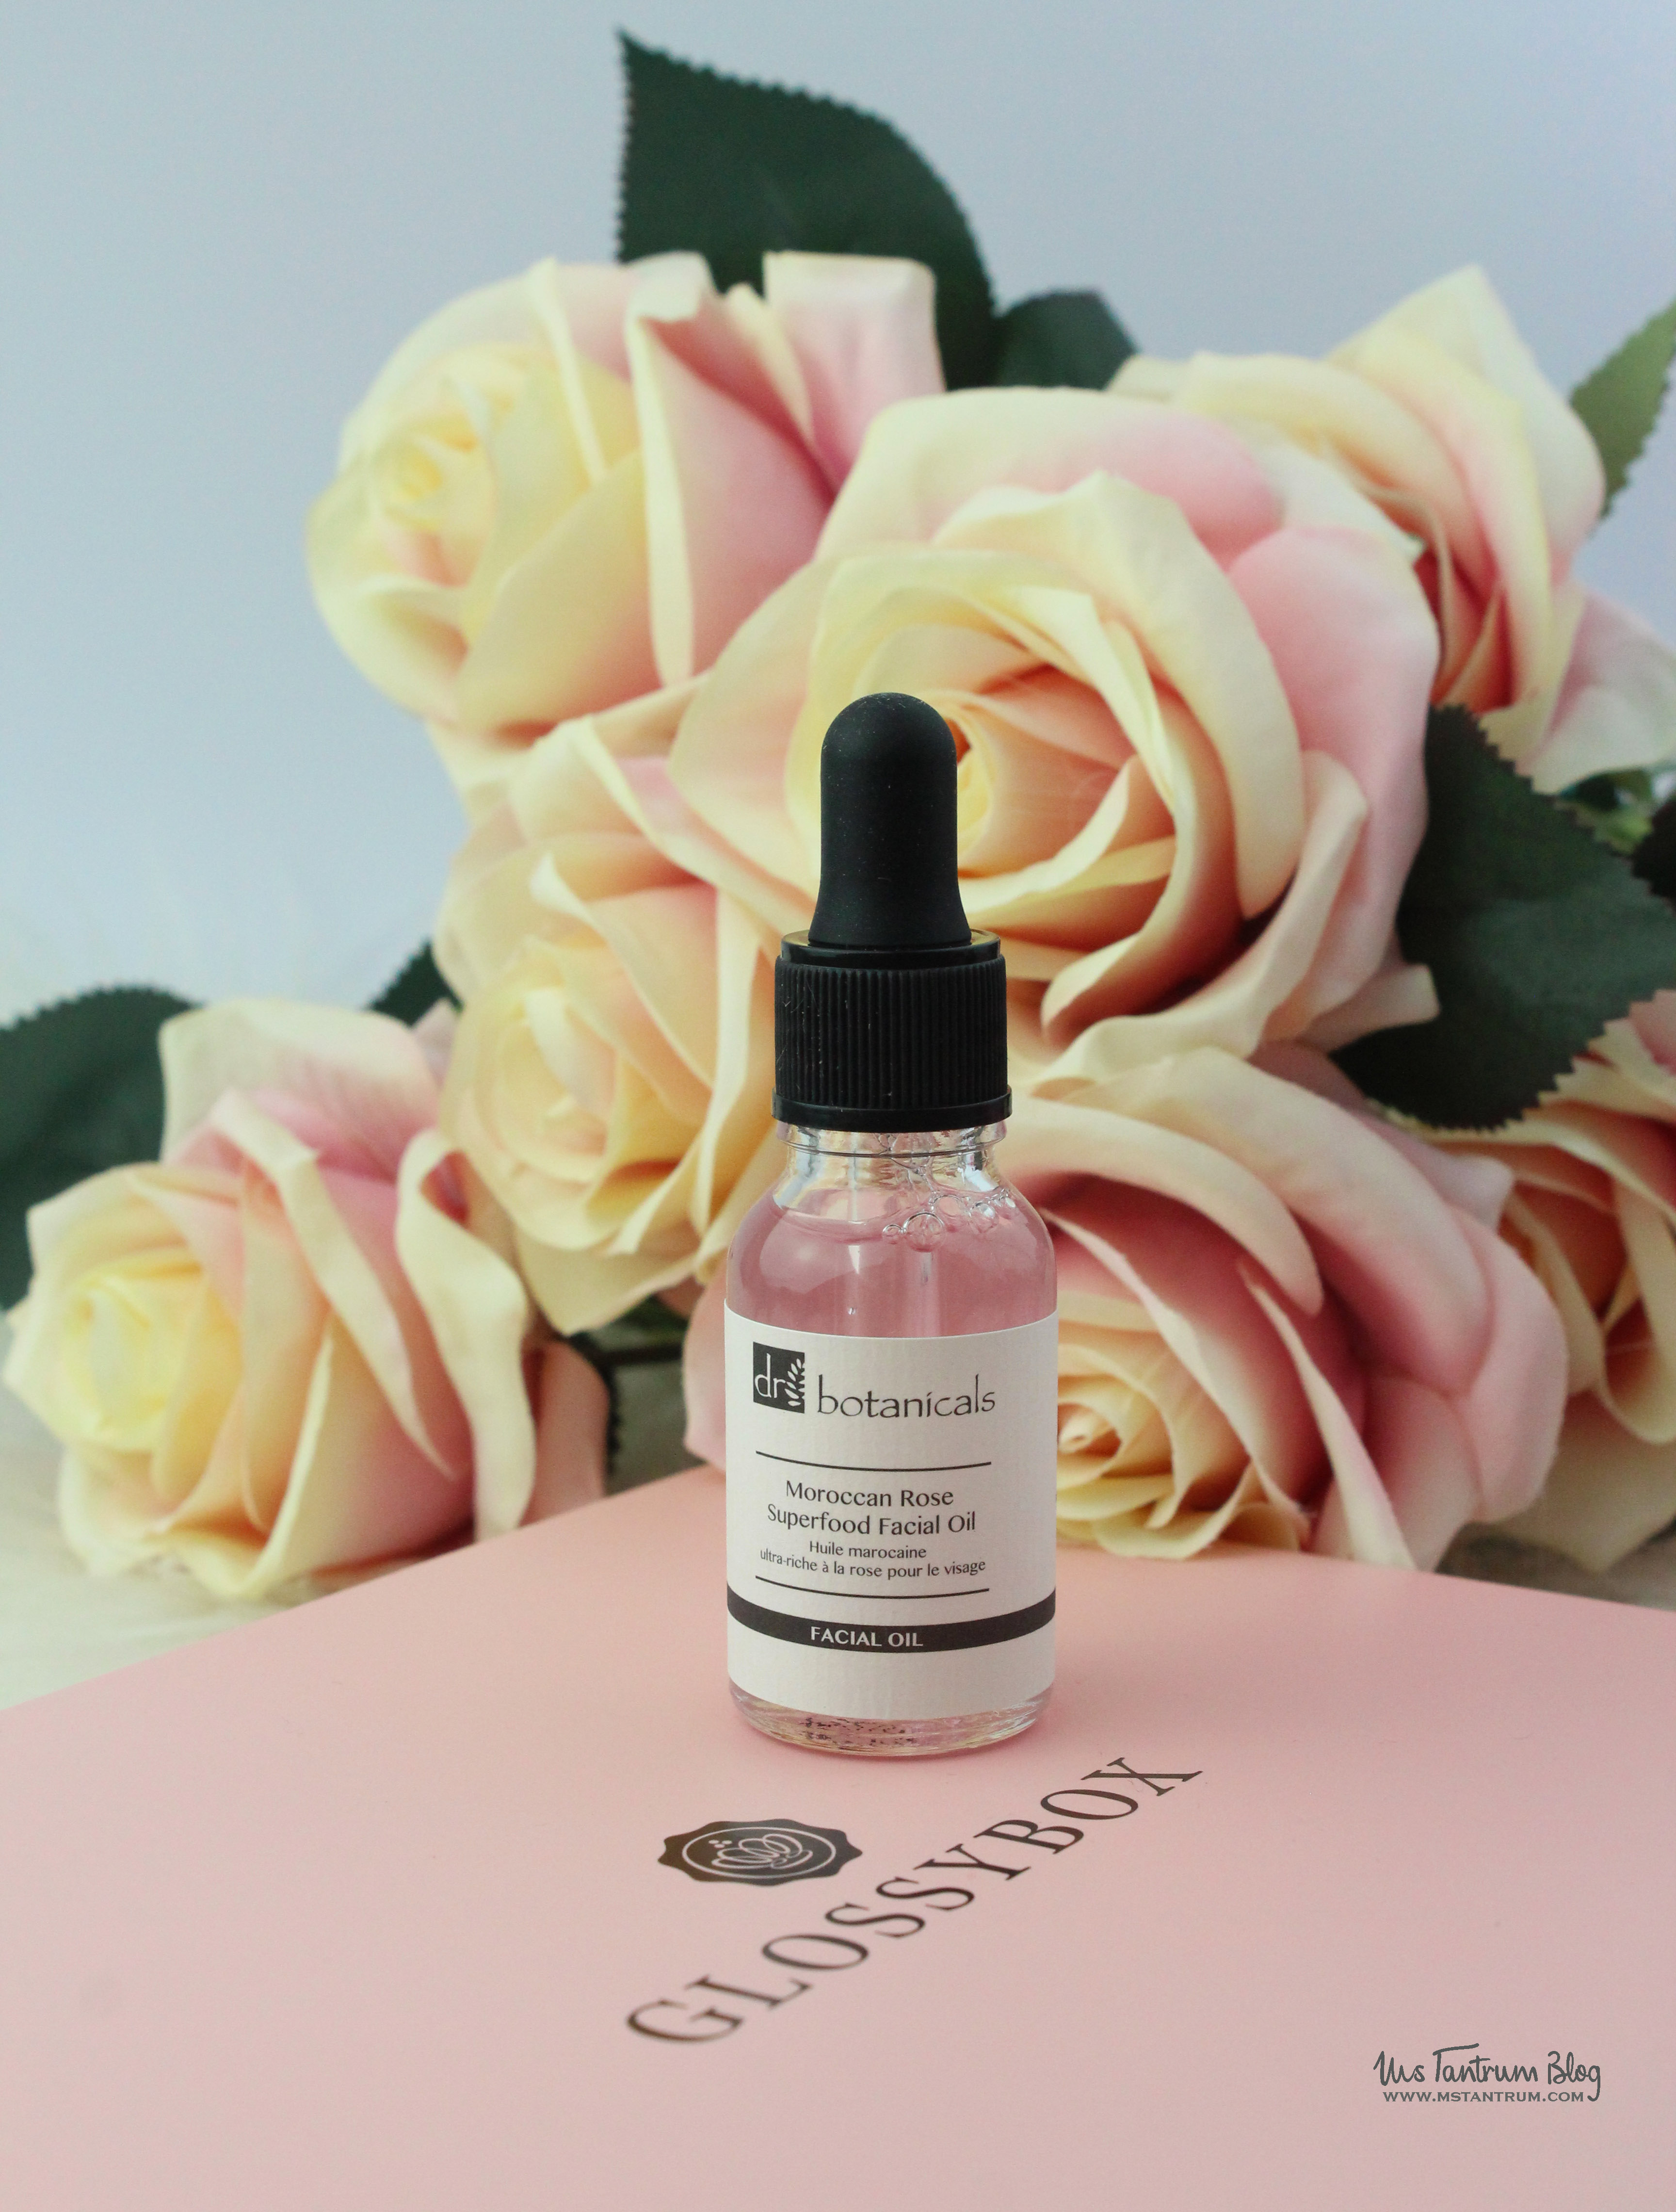  Dr. Botanicals Moroccan Rose and Superfood Facial Oil